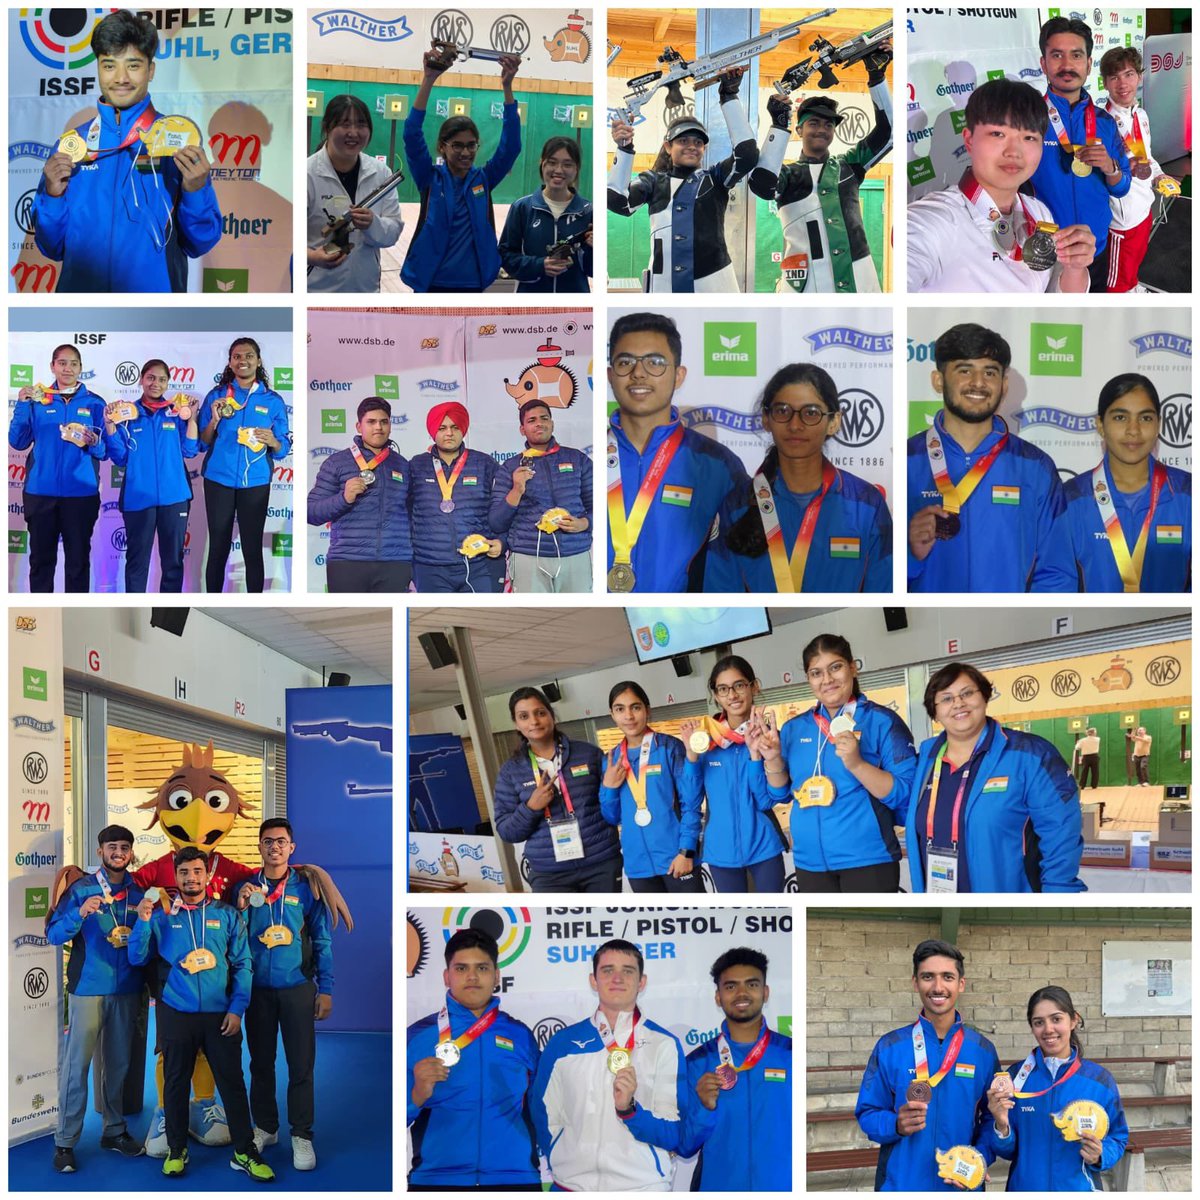 My heartiest congratulation to Team India for proving their mettle by winning the highest number of medals in the ISSF Junior World Cup 2023.

They have shown again that India is a nation of young prodigies. May this victory be the stepping stone for even greater achievements.